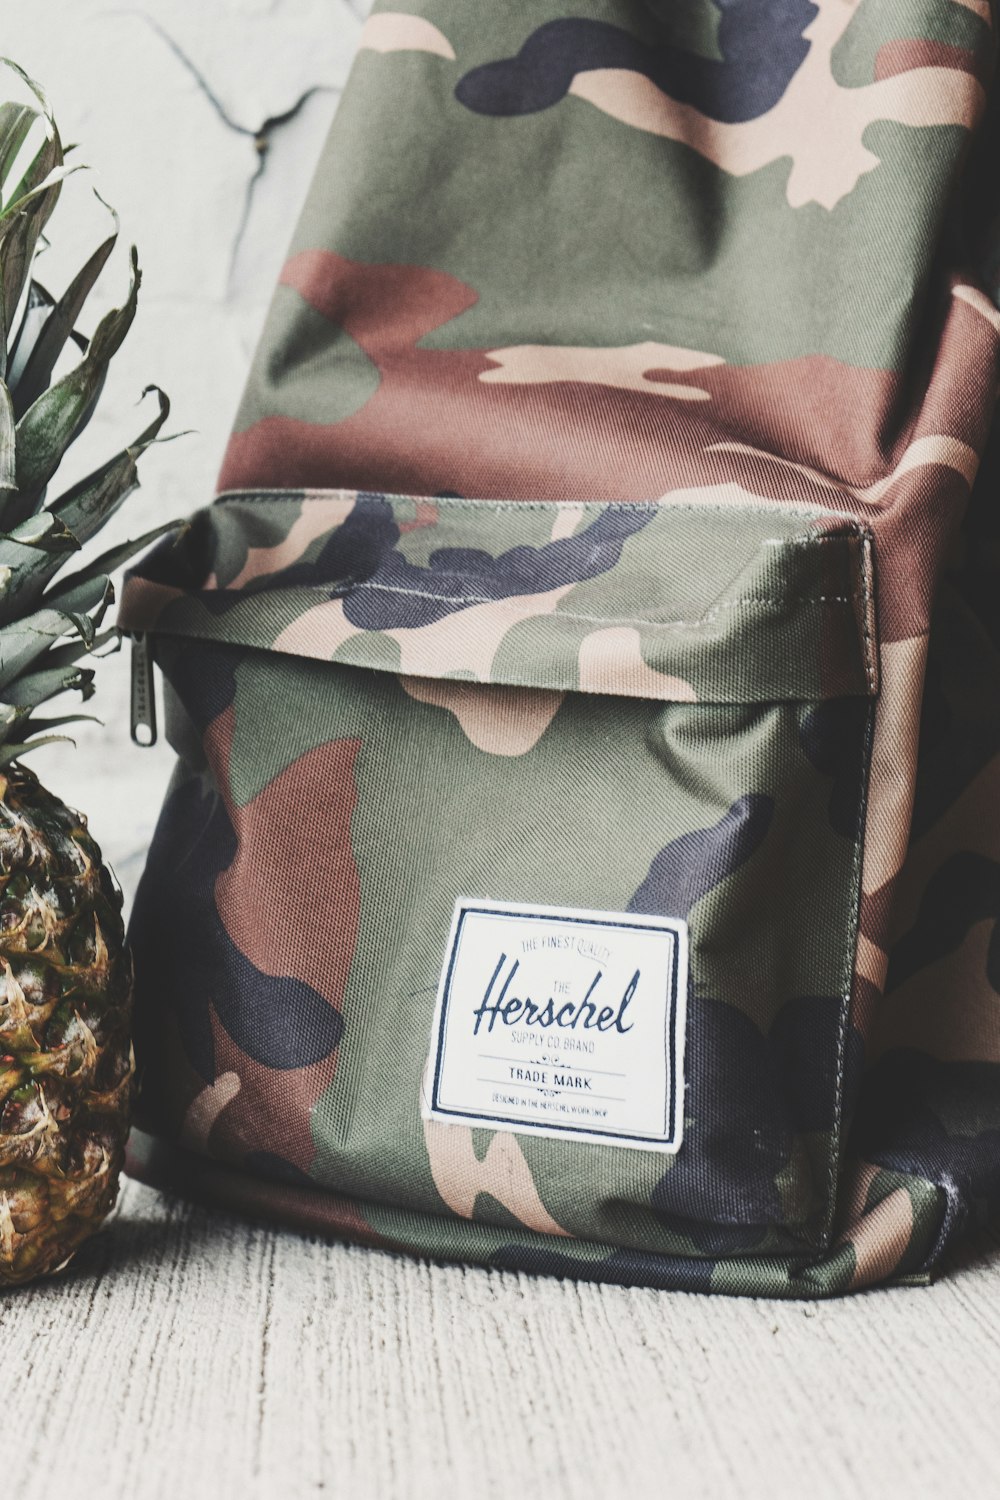 Cropped shot of a camo backpack and part of a pineapple.